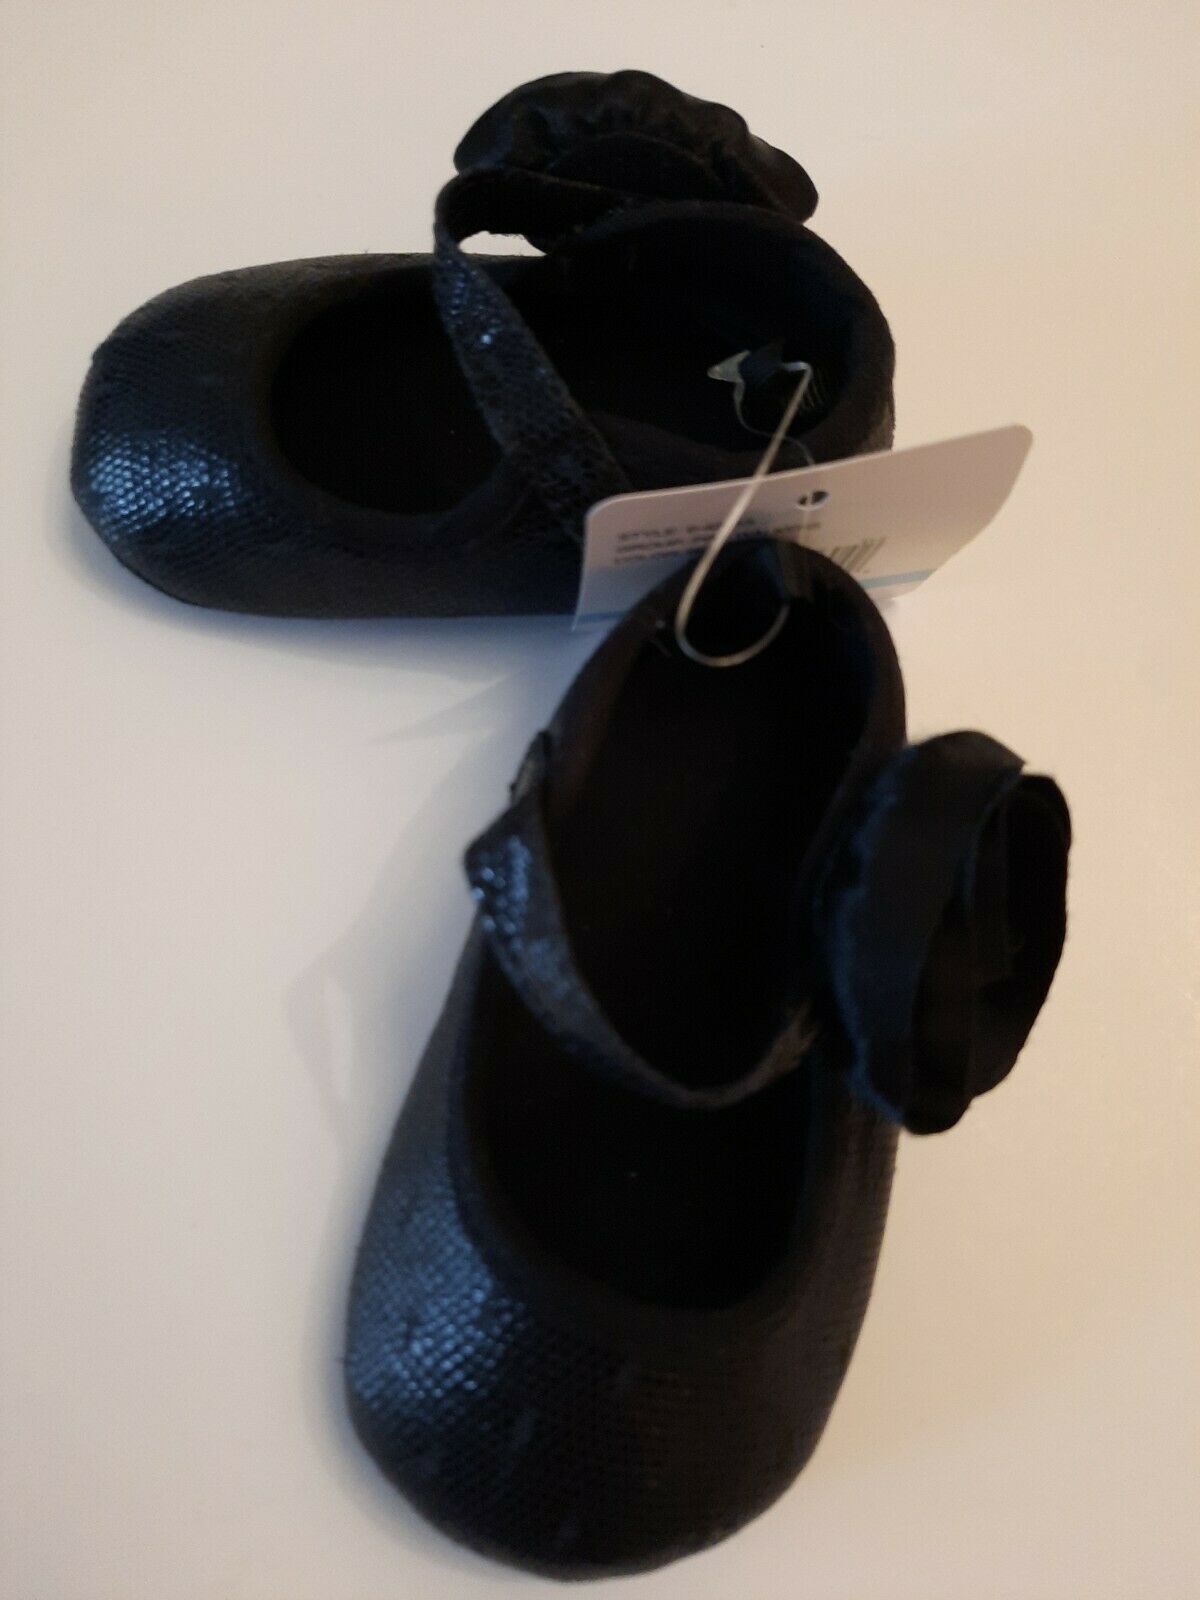 Baby Girl Black Dress Shoes - Size 6 months- NWT